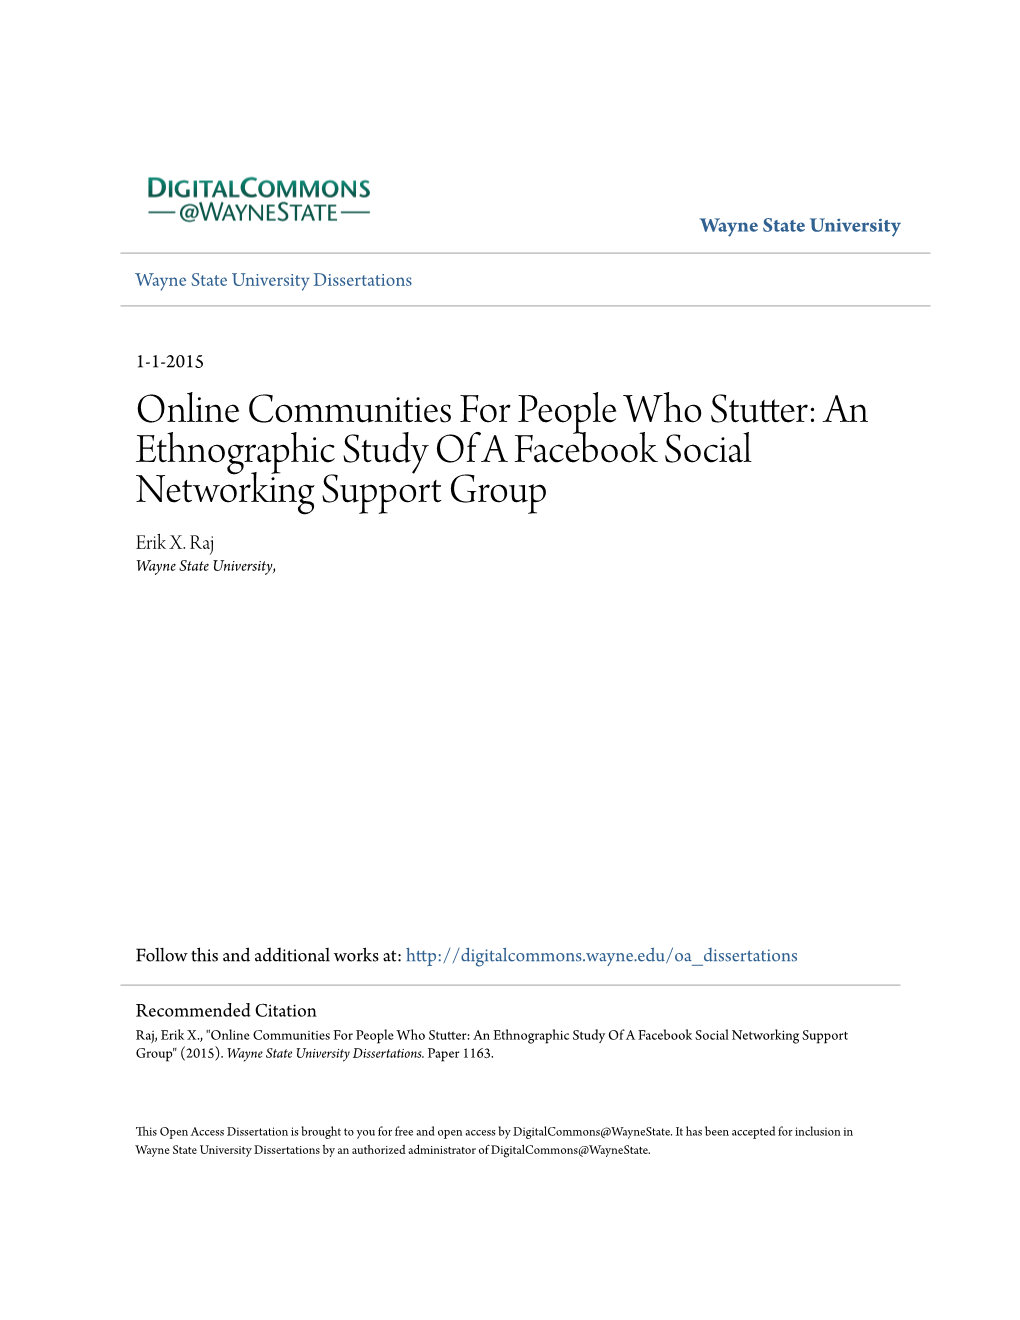 Online Communities for People Who Stutter: an Ethnographic Study of a Facebook Social Networking Support Group Erik X